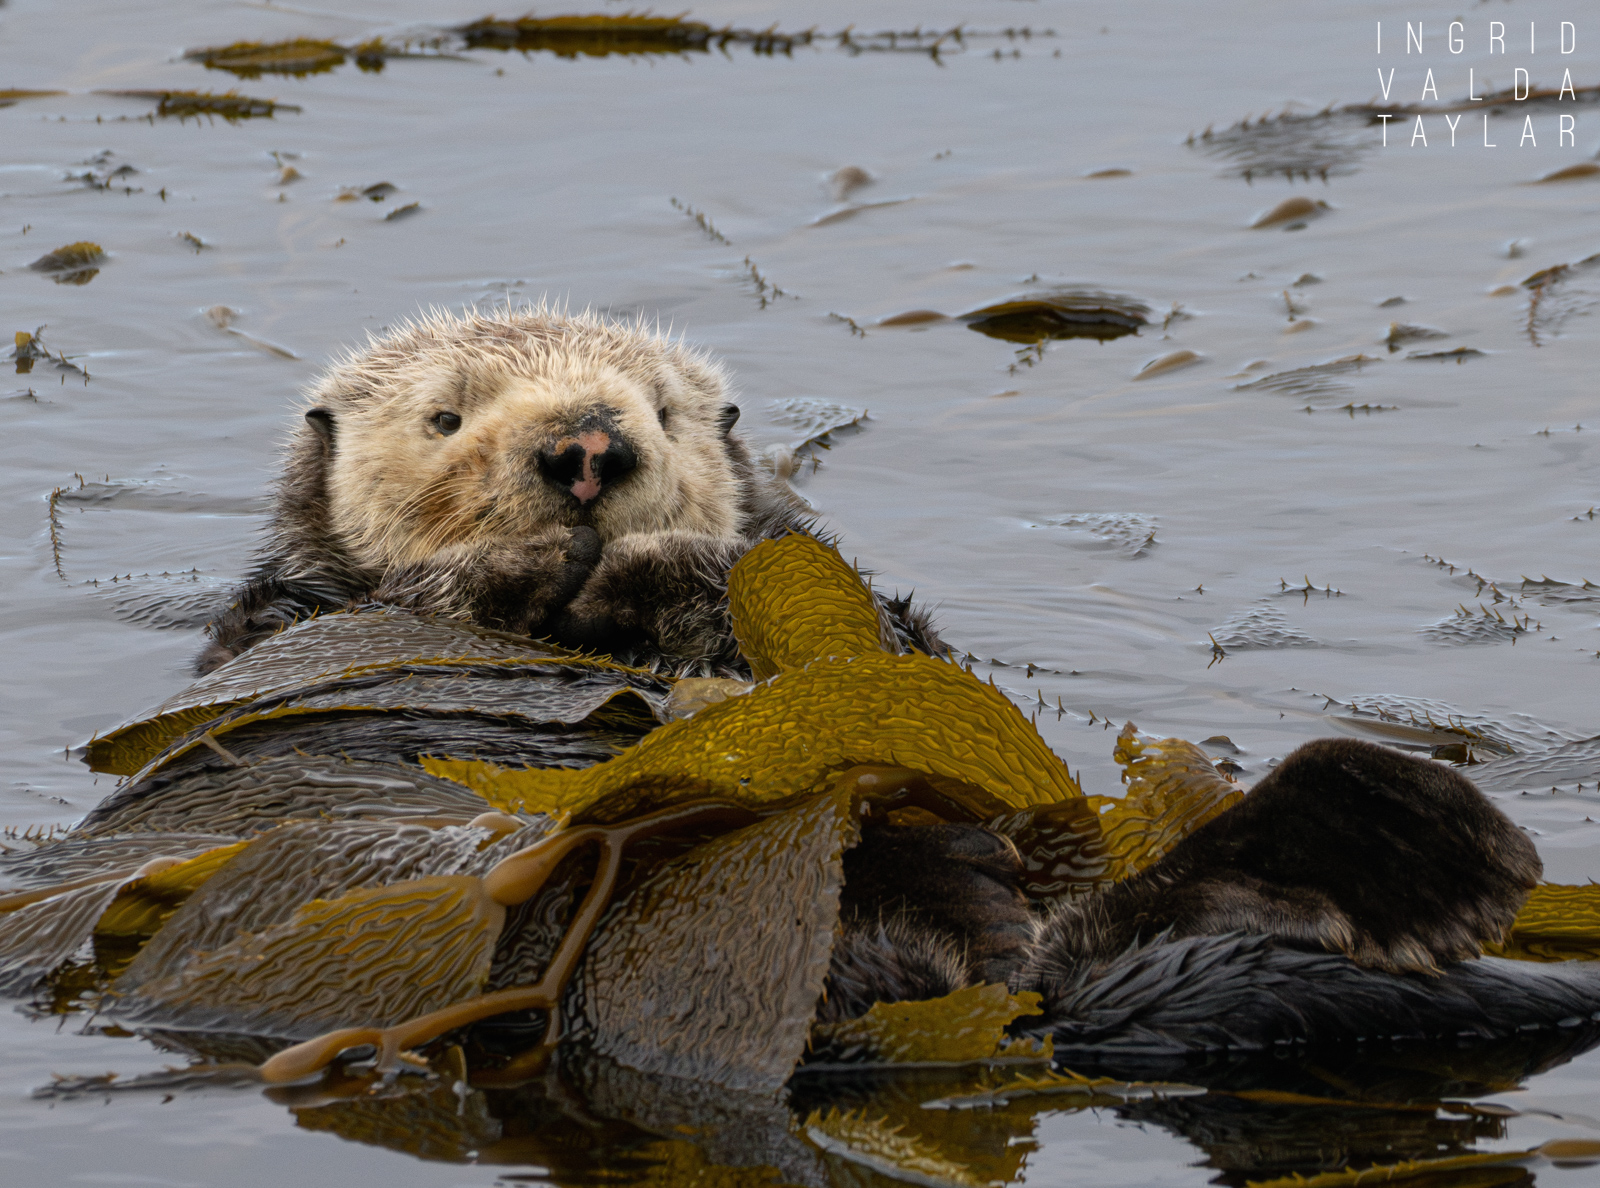 Southern Sea Otter Wrapped in Kelp